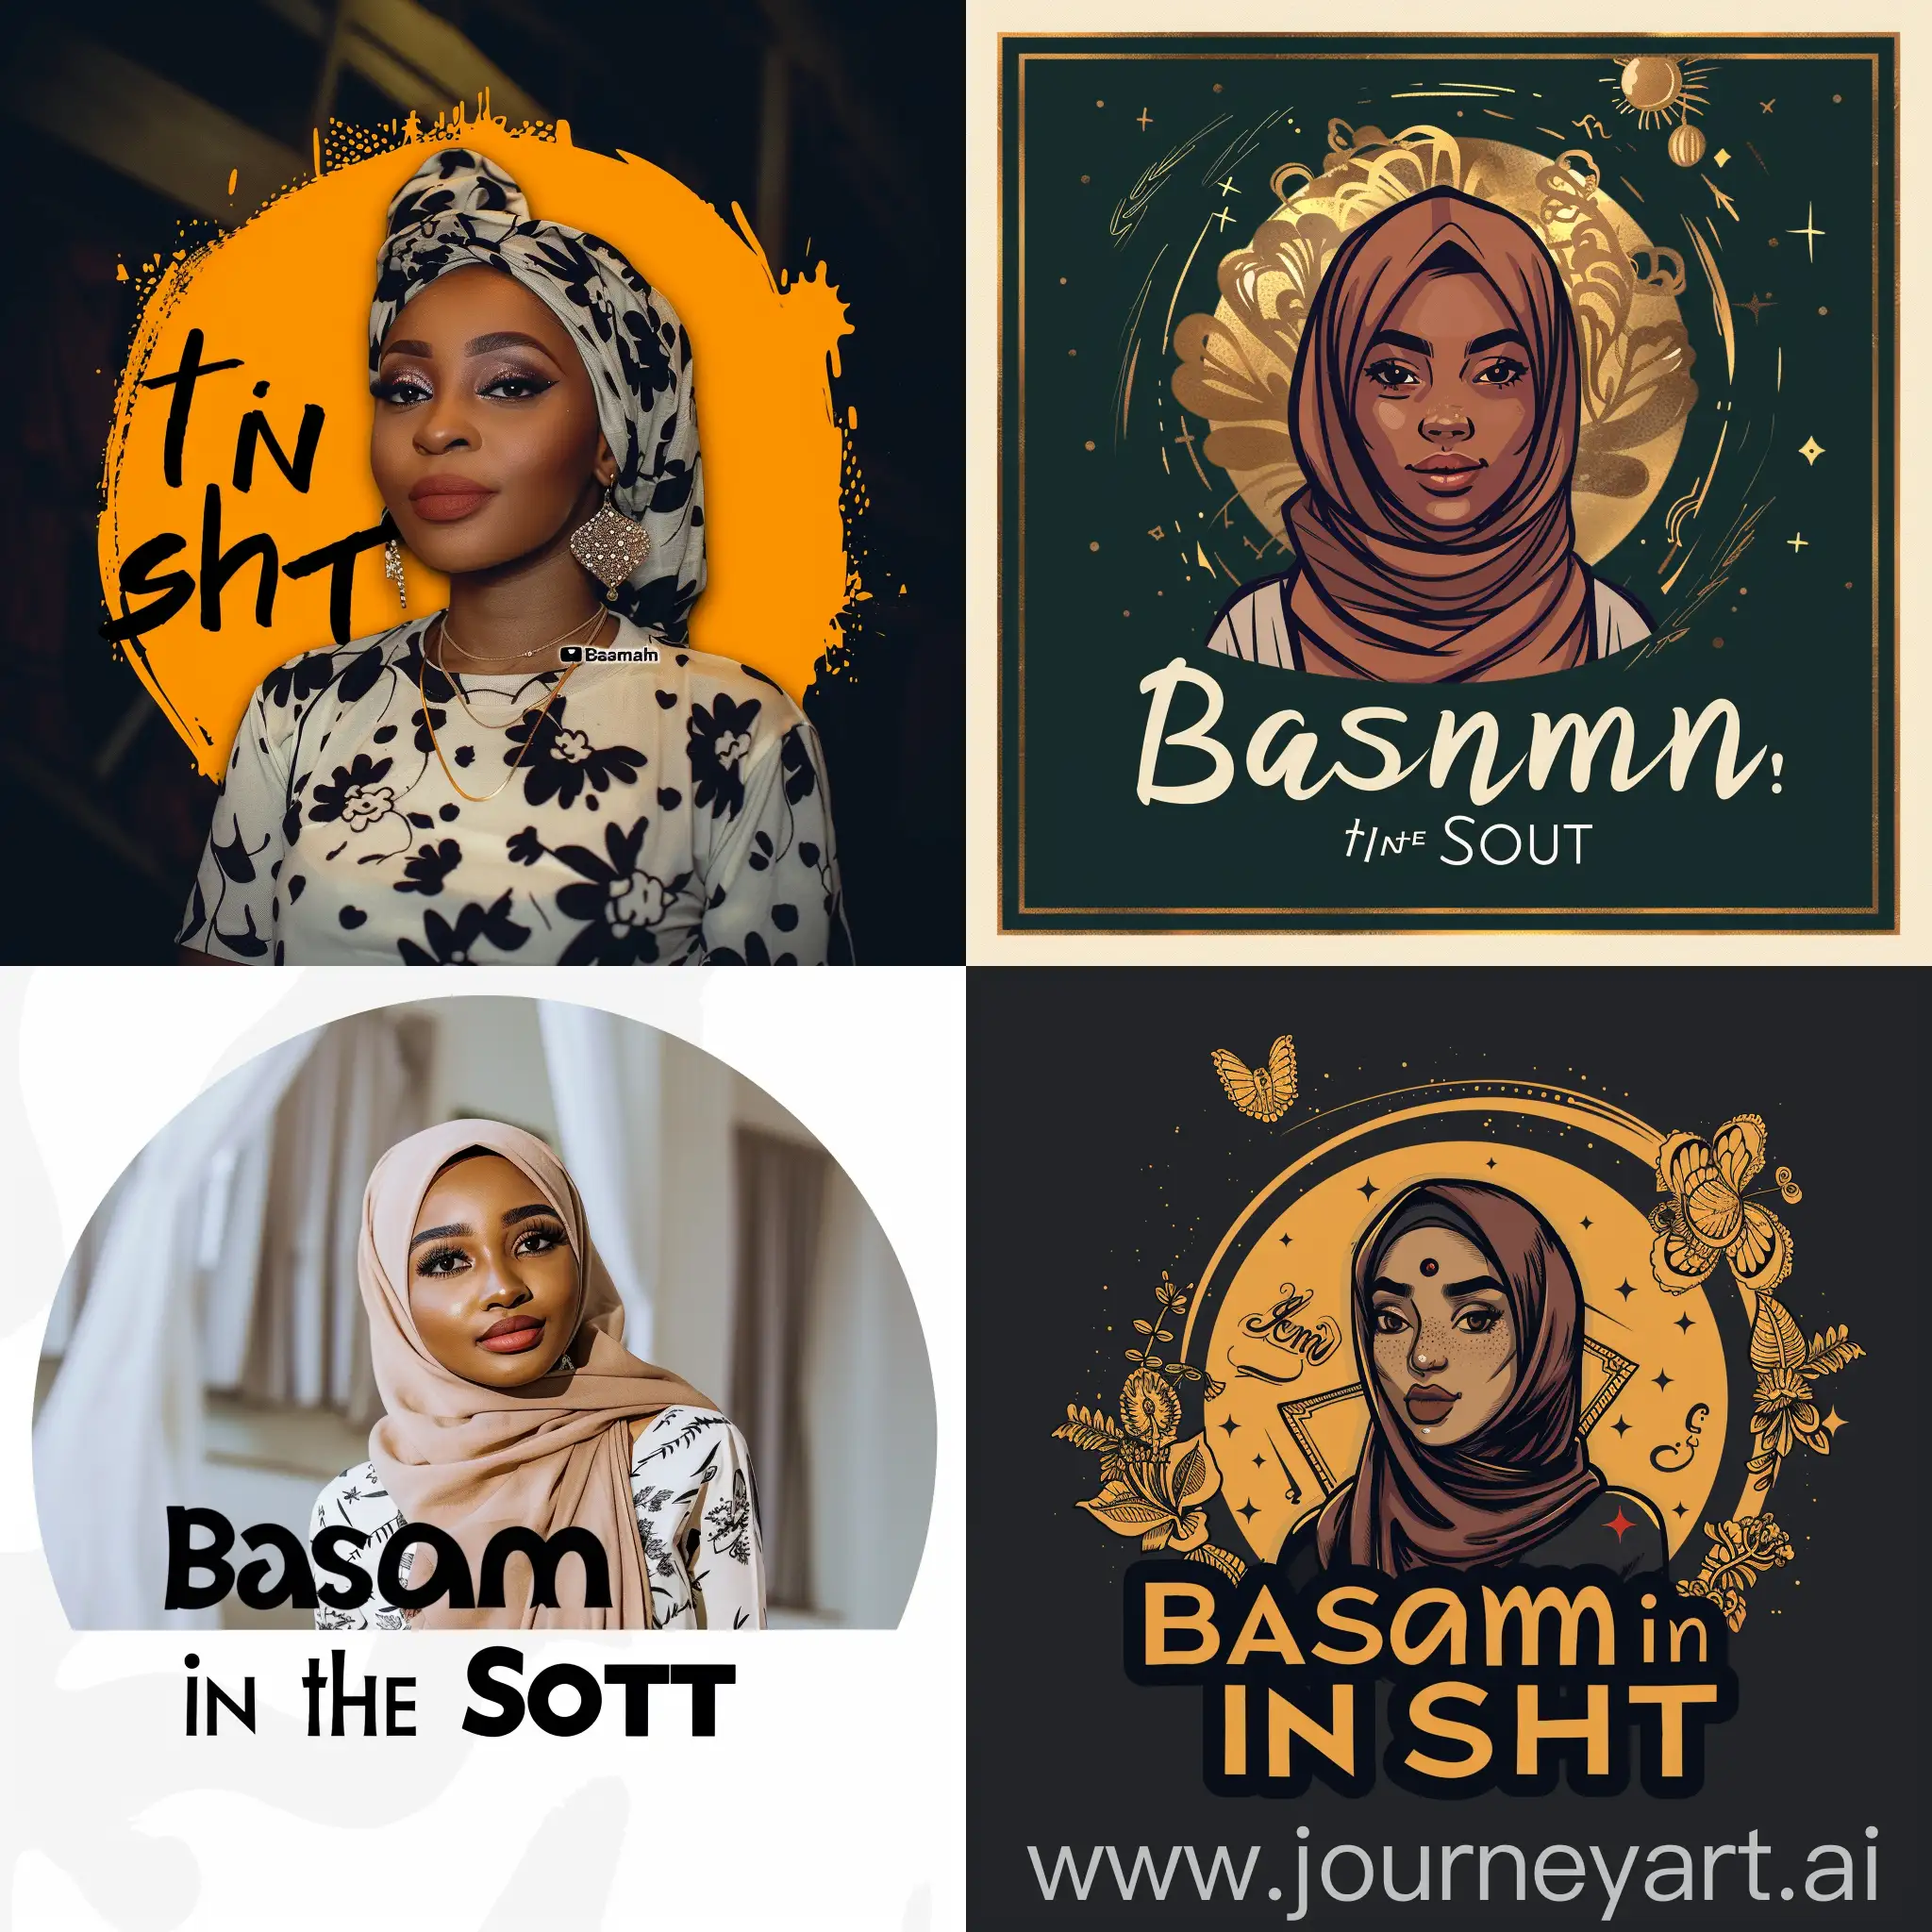 Basmah-in-the-Story-Logo-Design-Vibrant-and-Expressive-Artwork-for-YouTube-Channel